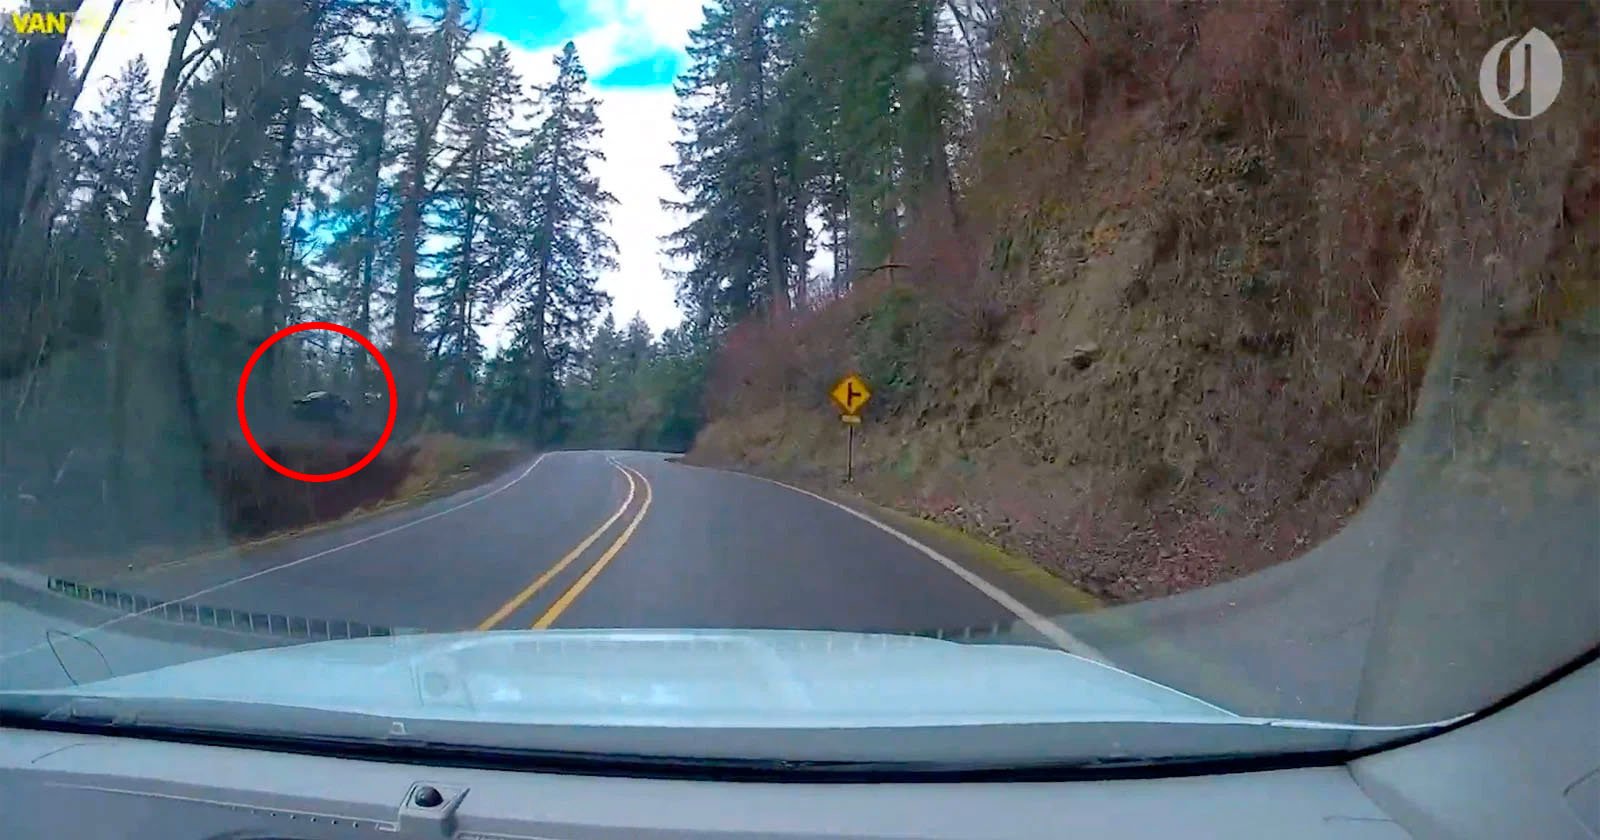 Dashcam footage shows a car go off the road before heading toward an embankment.